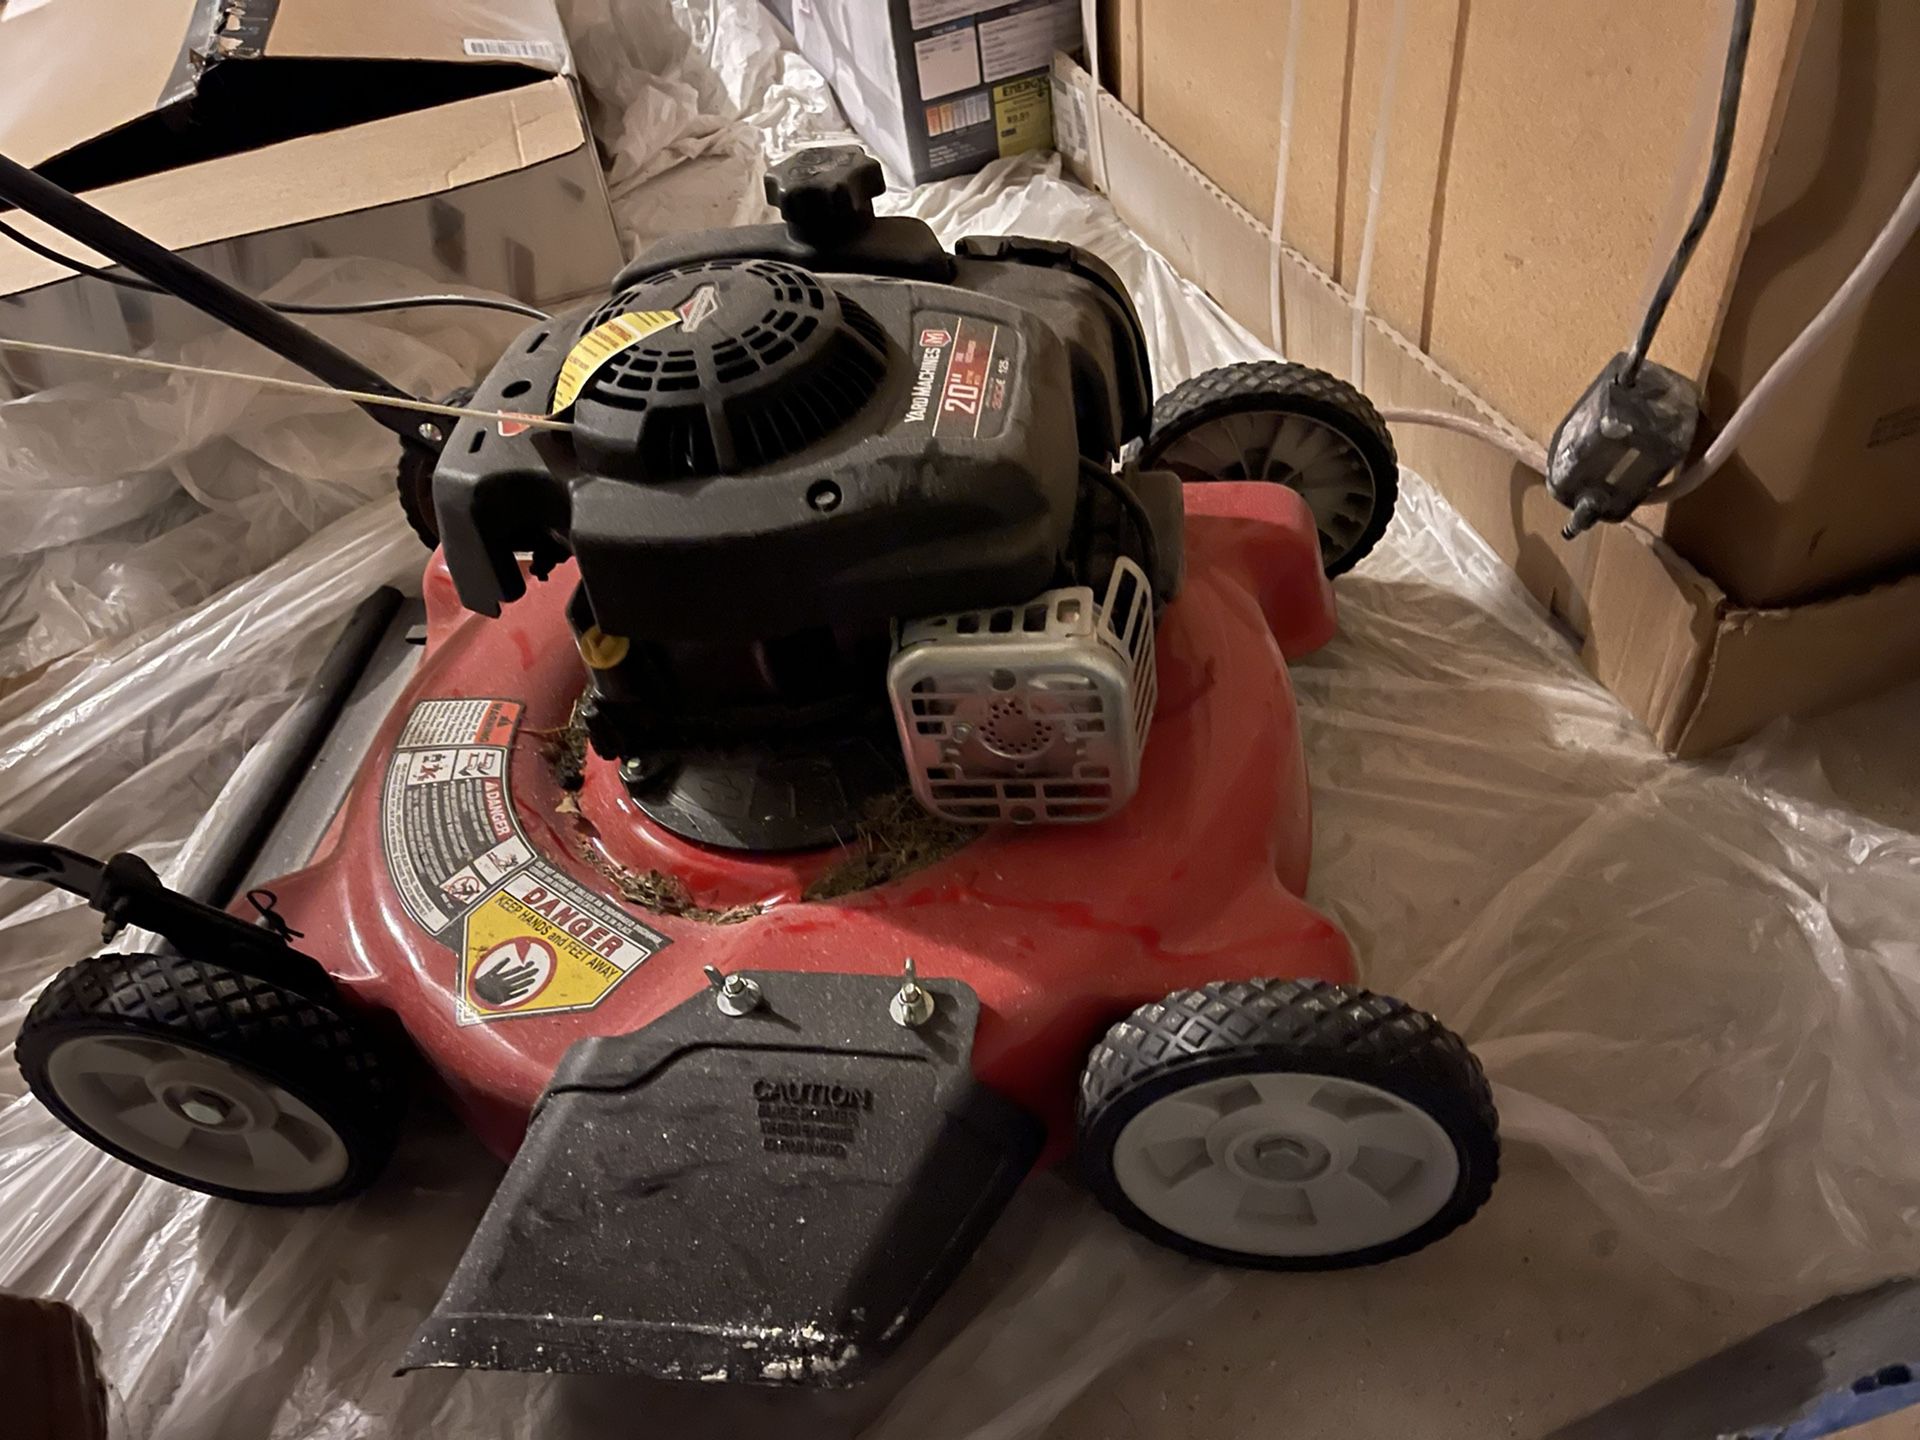 Lawnmower For Sale Used 1 Time Before I Hired A Gardener. Paid More Than 300 For It. 